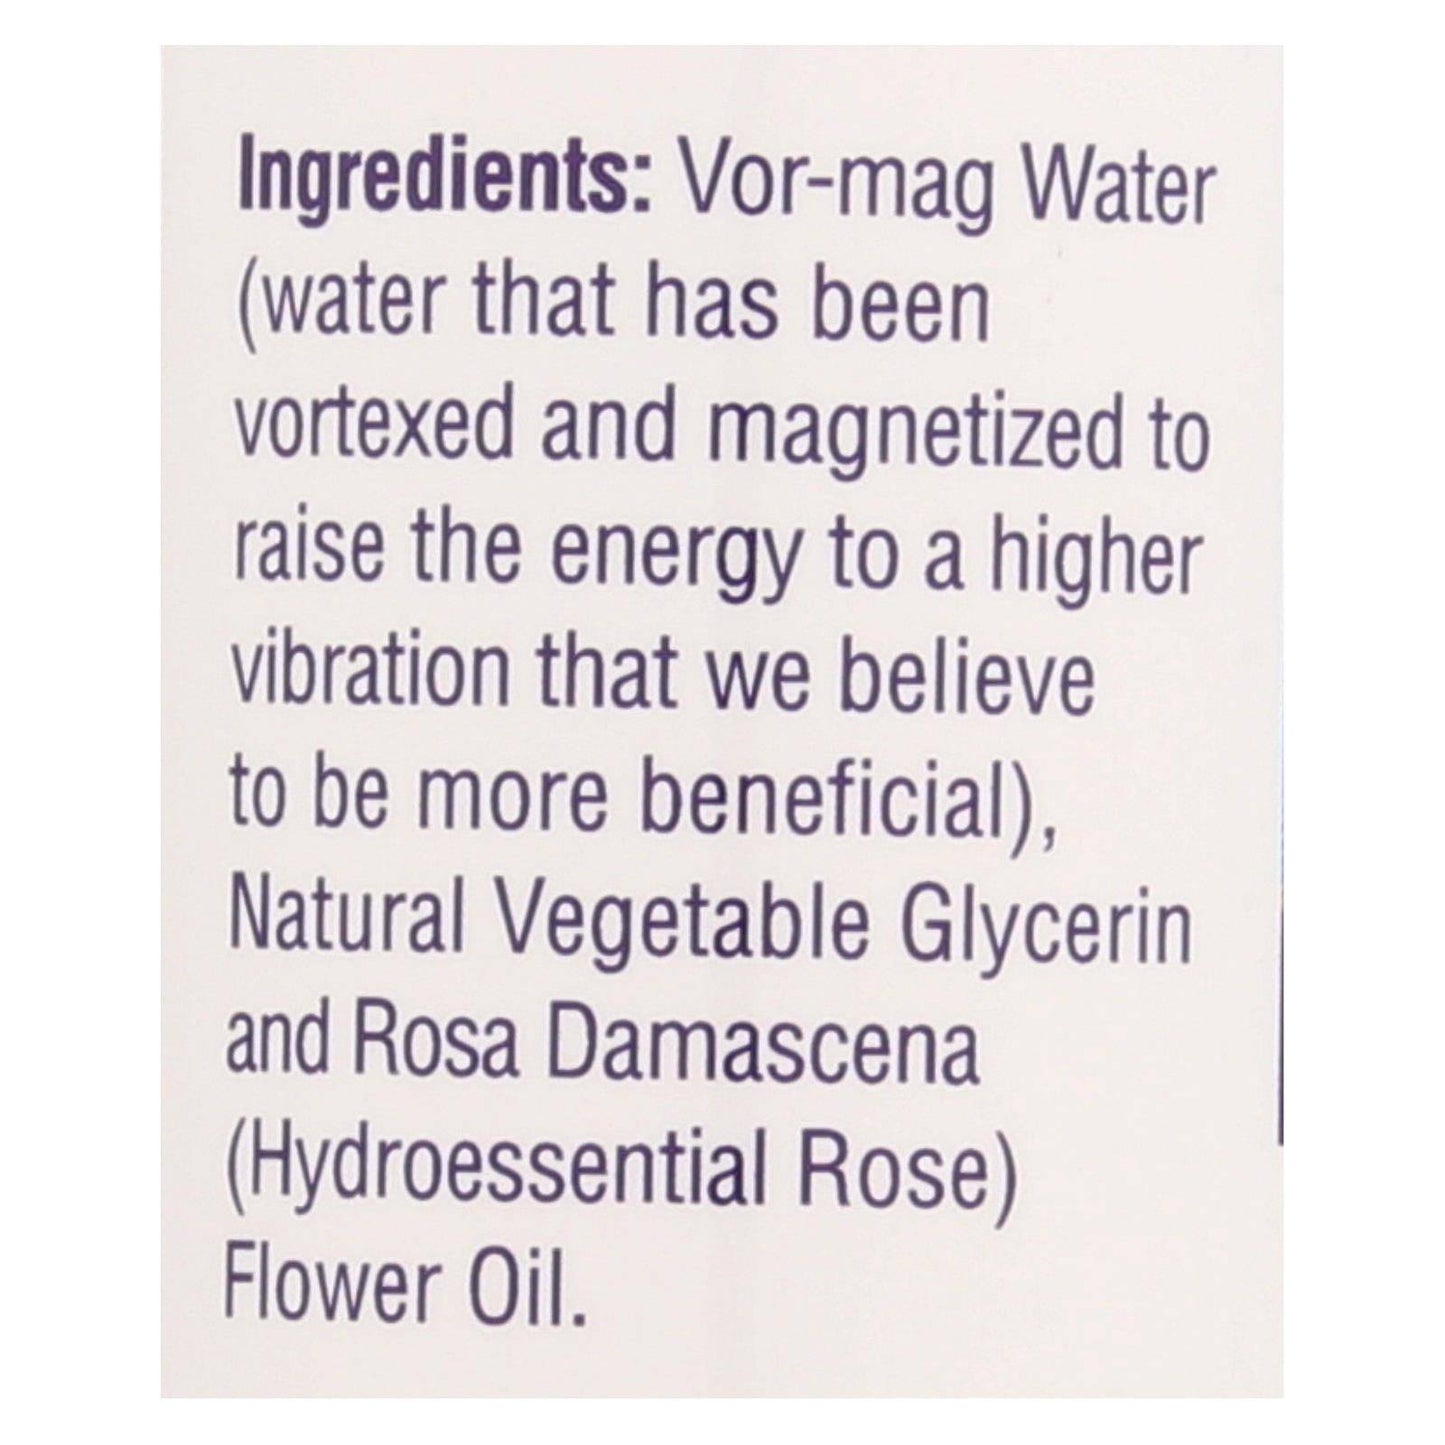 Buy Heritage Products Rosewater And Glycerin - 8 Fl Oz  at OnlyNaturals.us